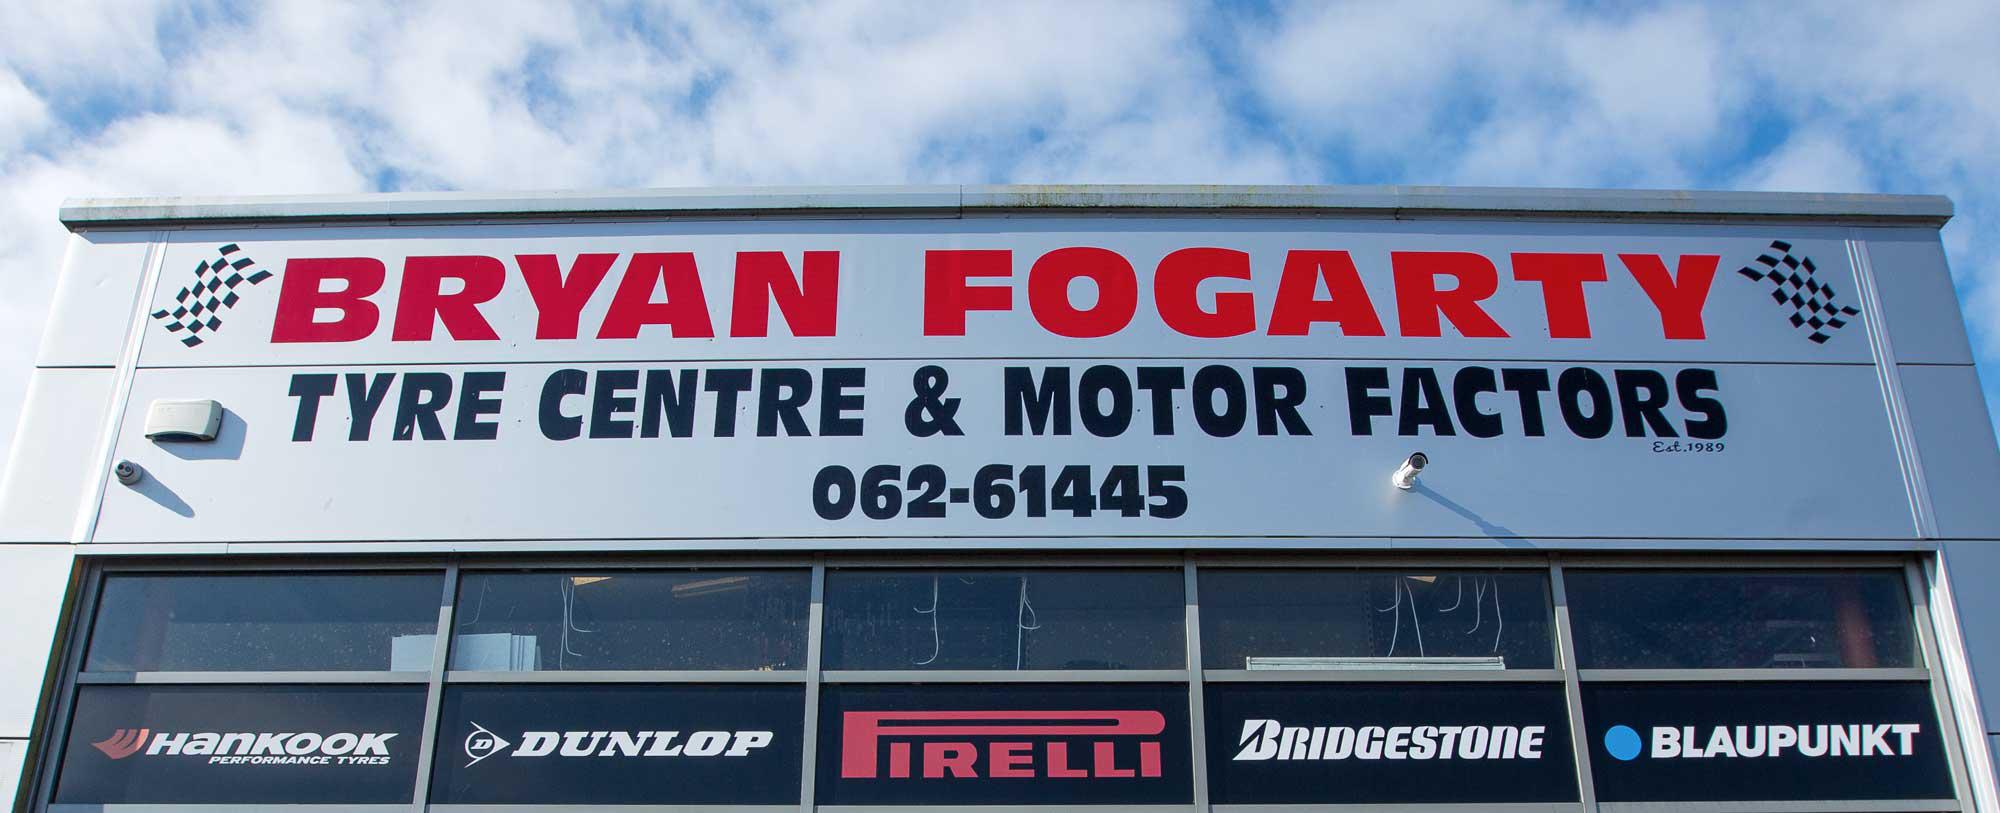 Bryan Fogarty Tyres and Motor Factors Tipperary (062) 61445